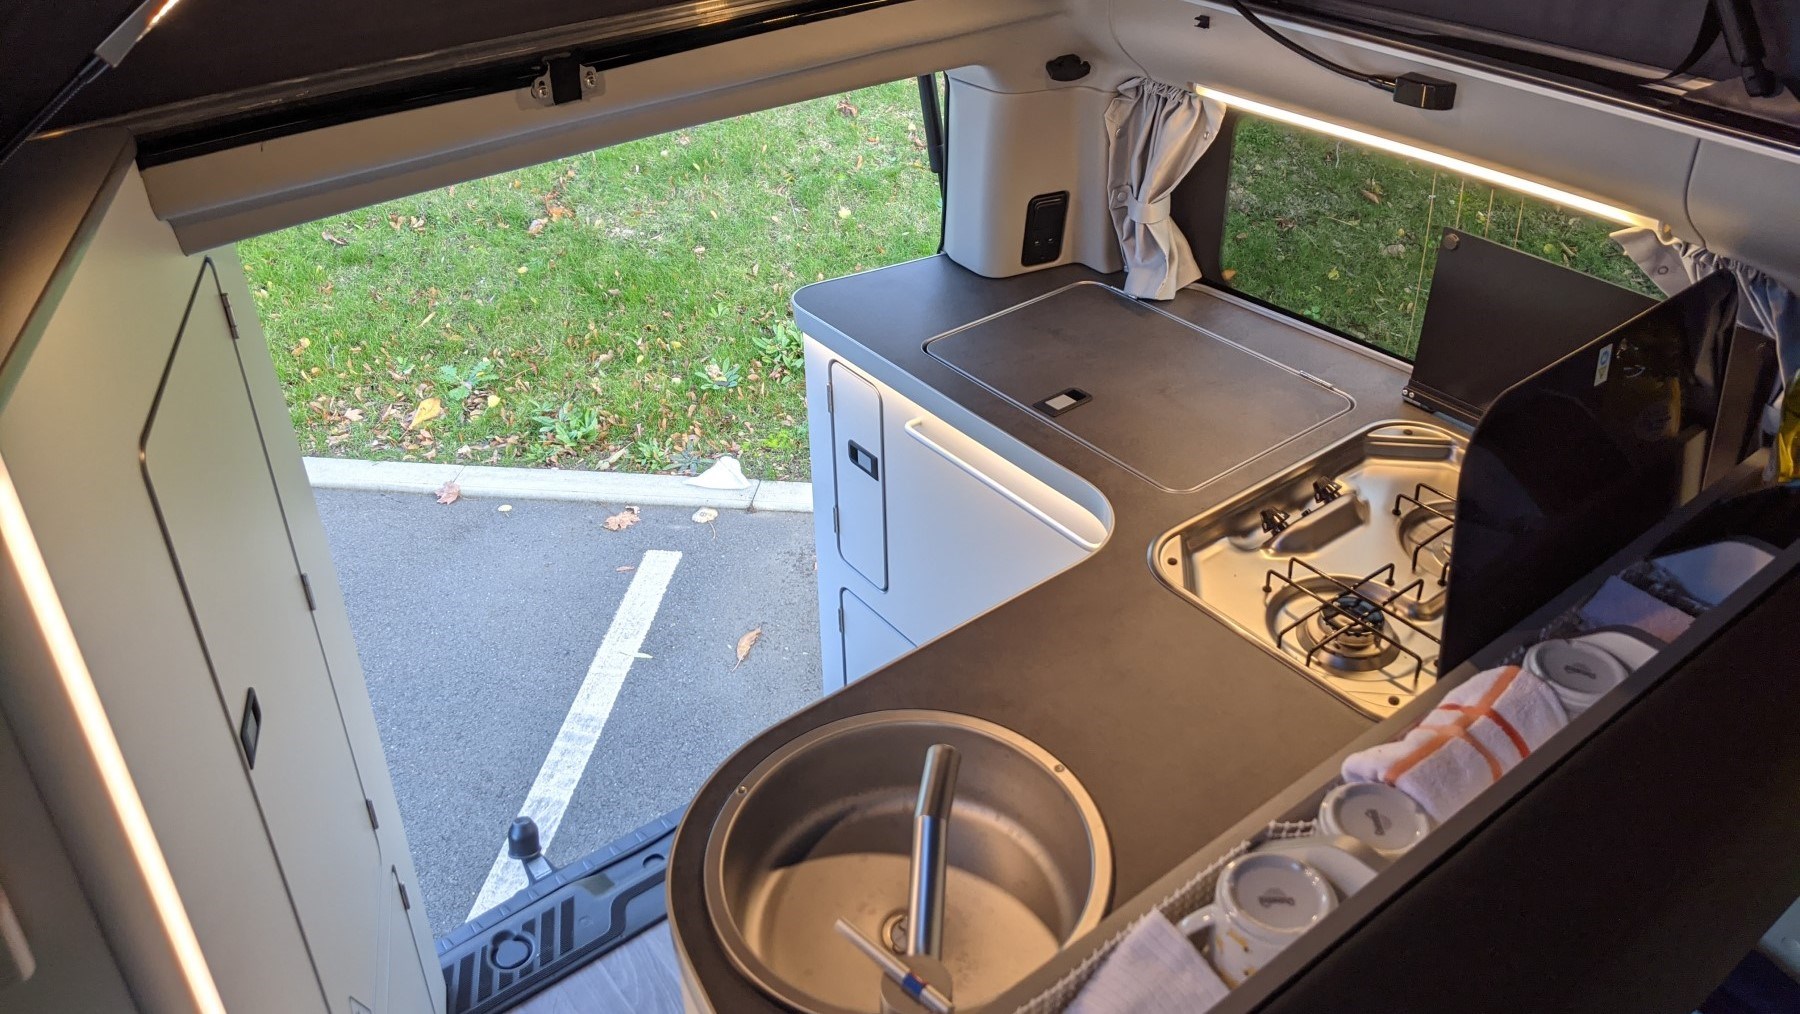 Inside incredible tech that can morph any van into a camper… no need for a  costly transformation